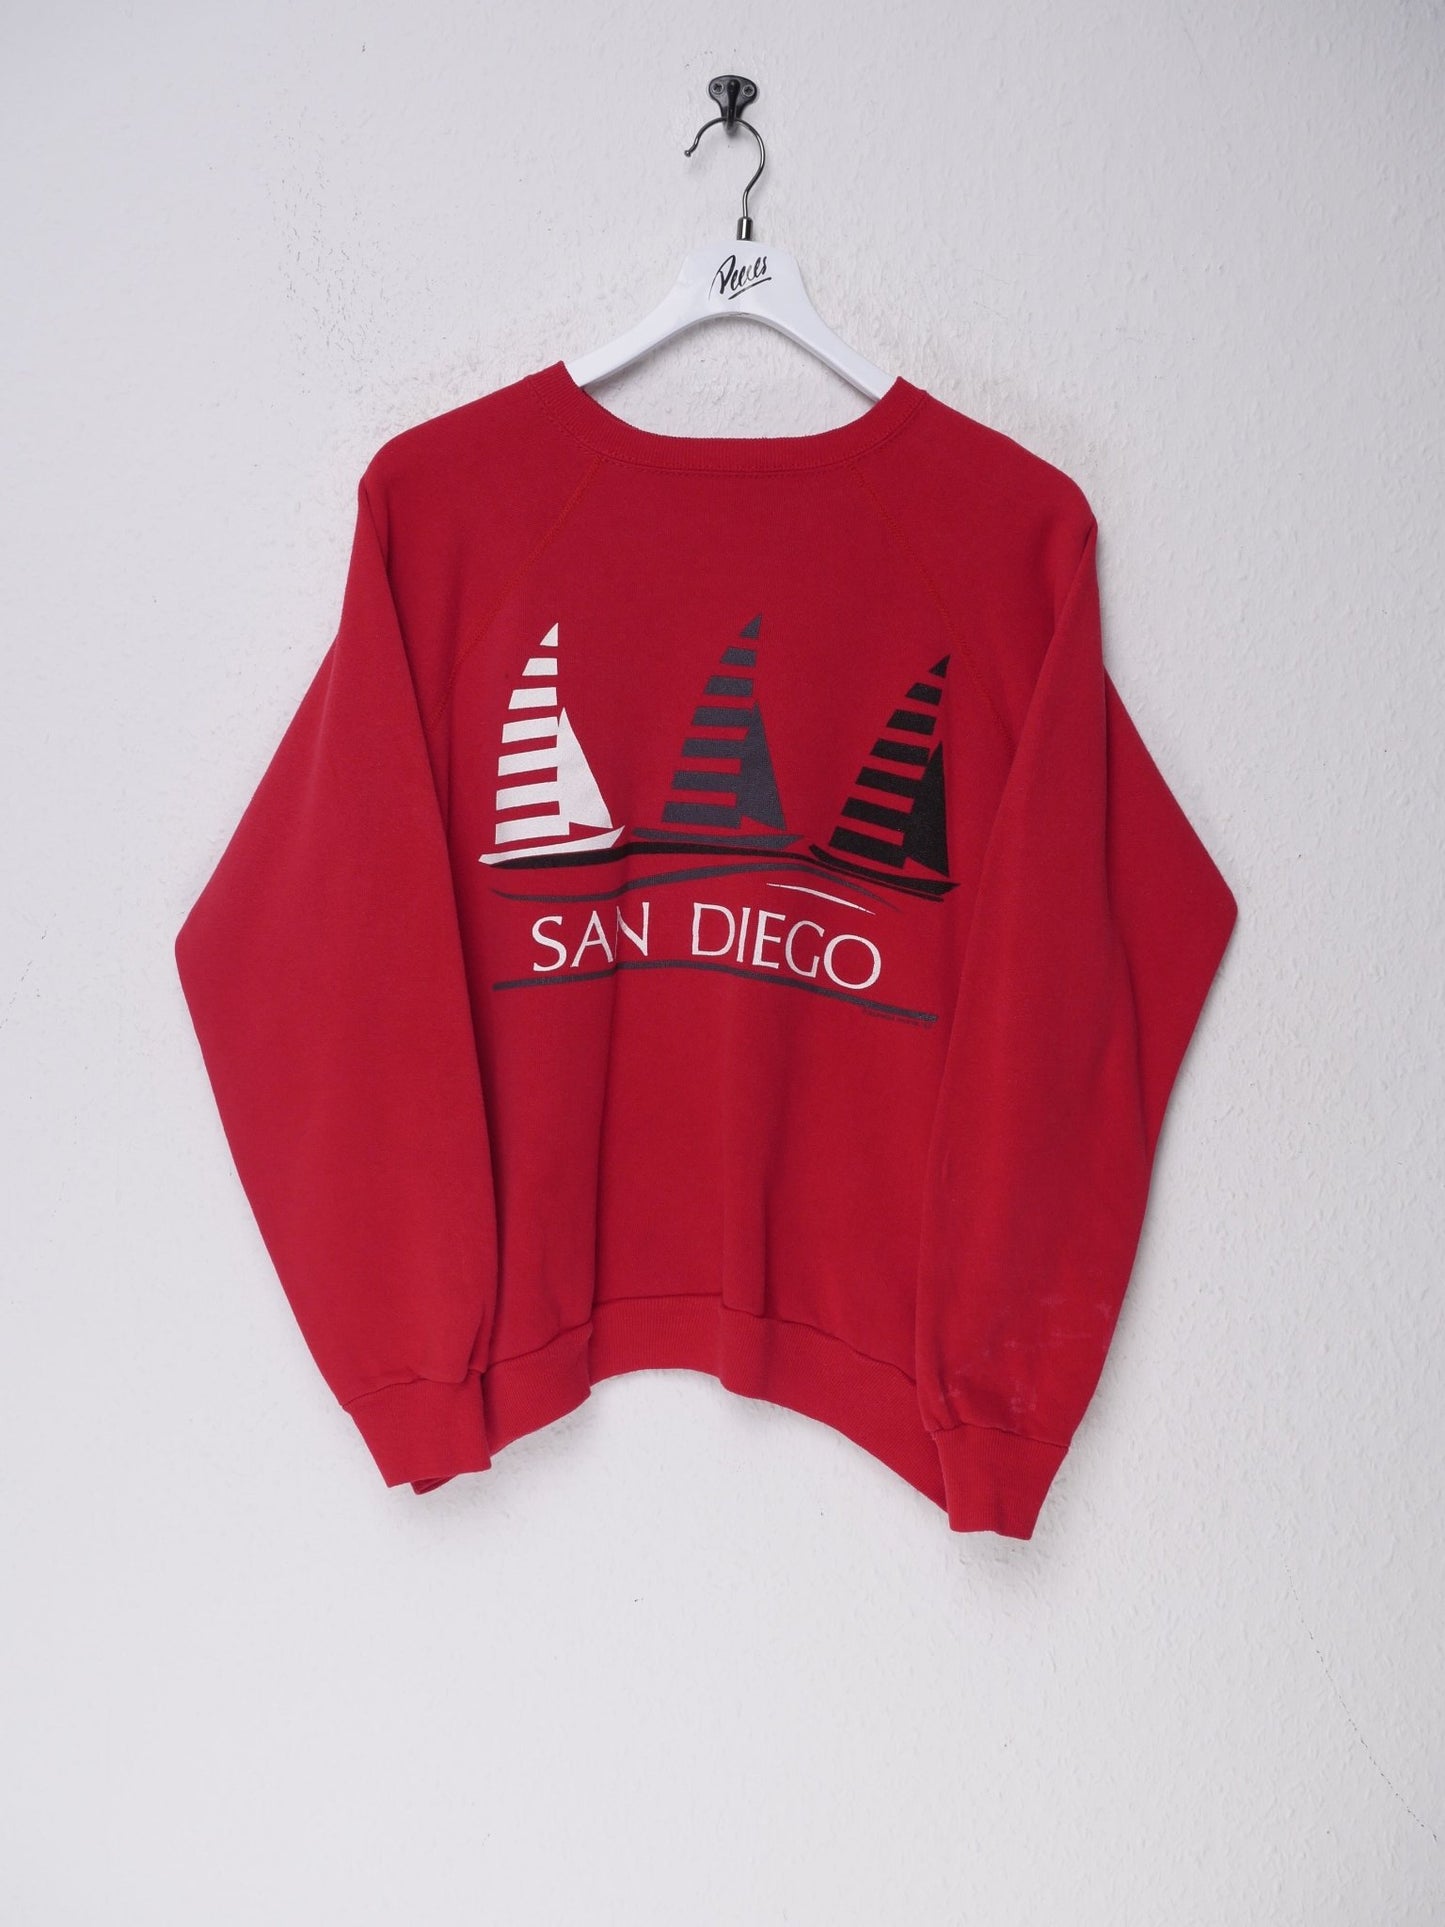 'San Diego' printed Graphic red Vintage Sweater - Peeces